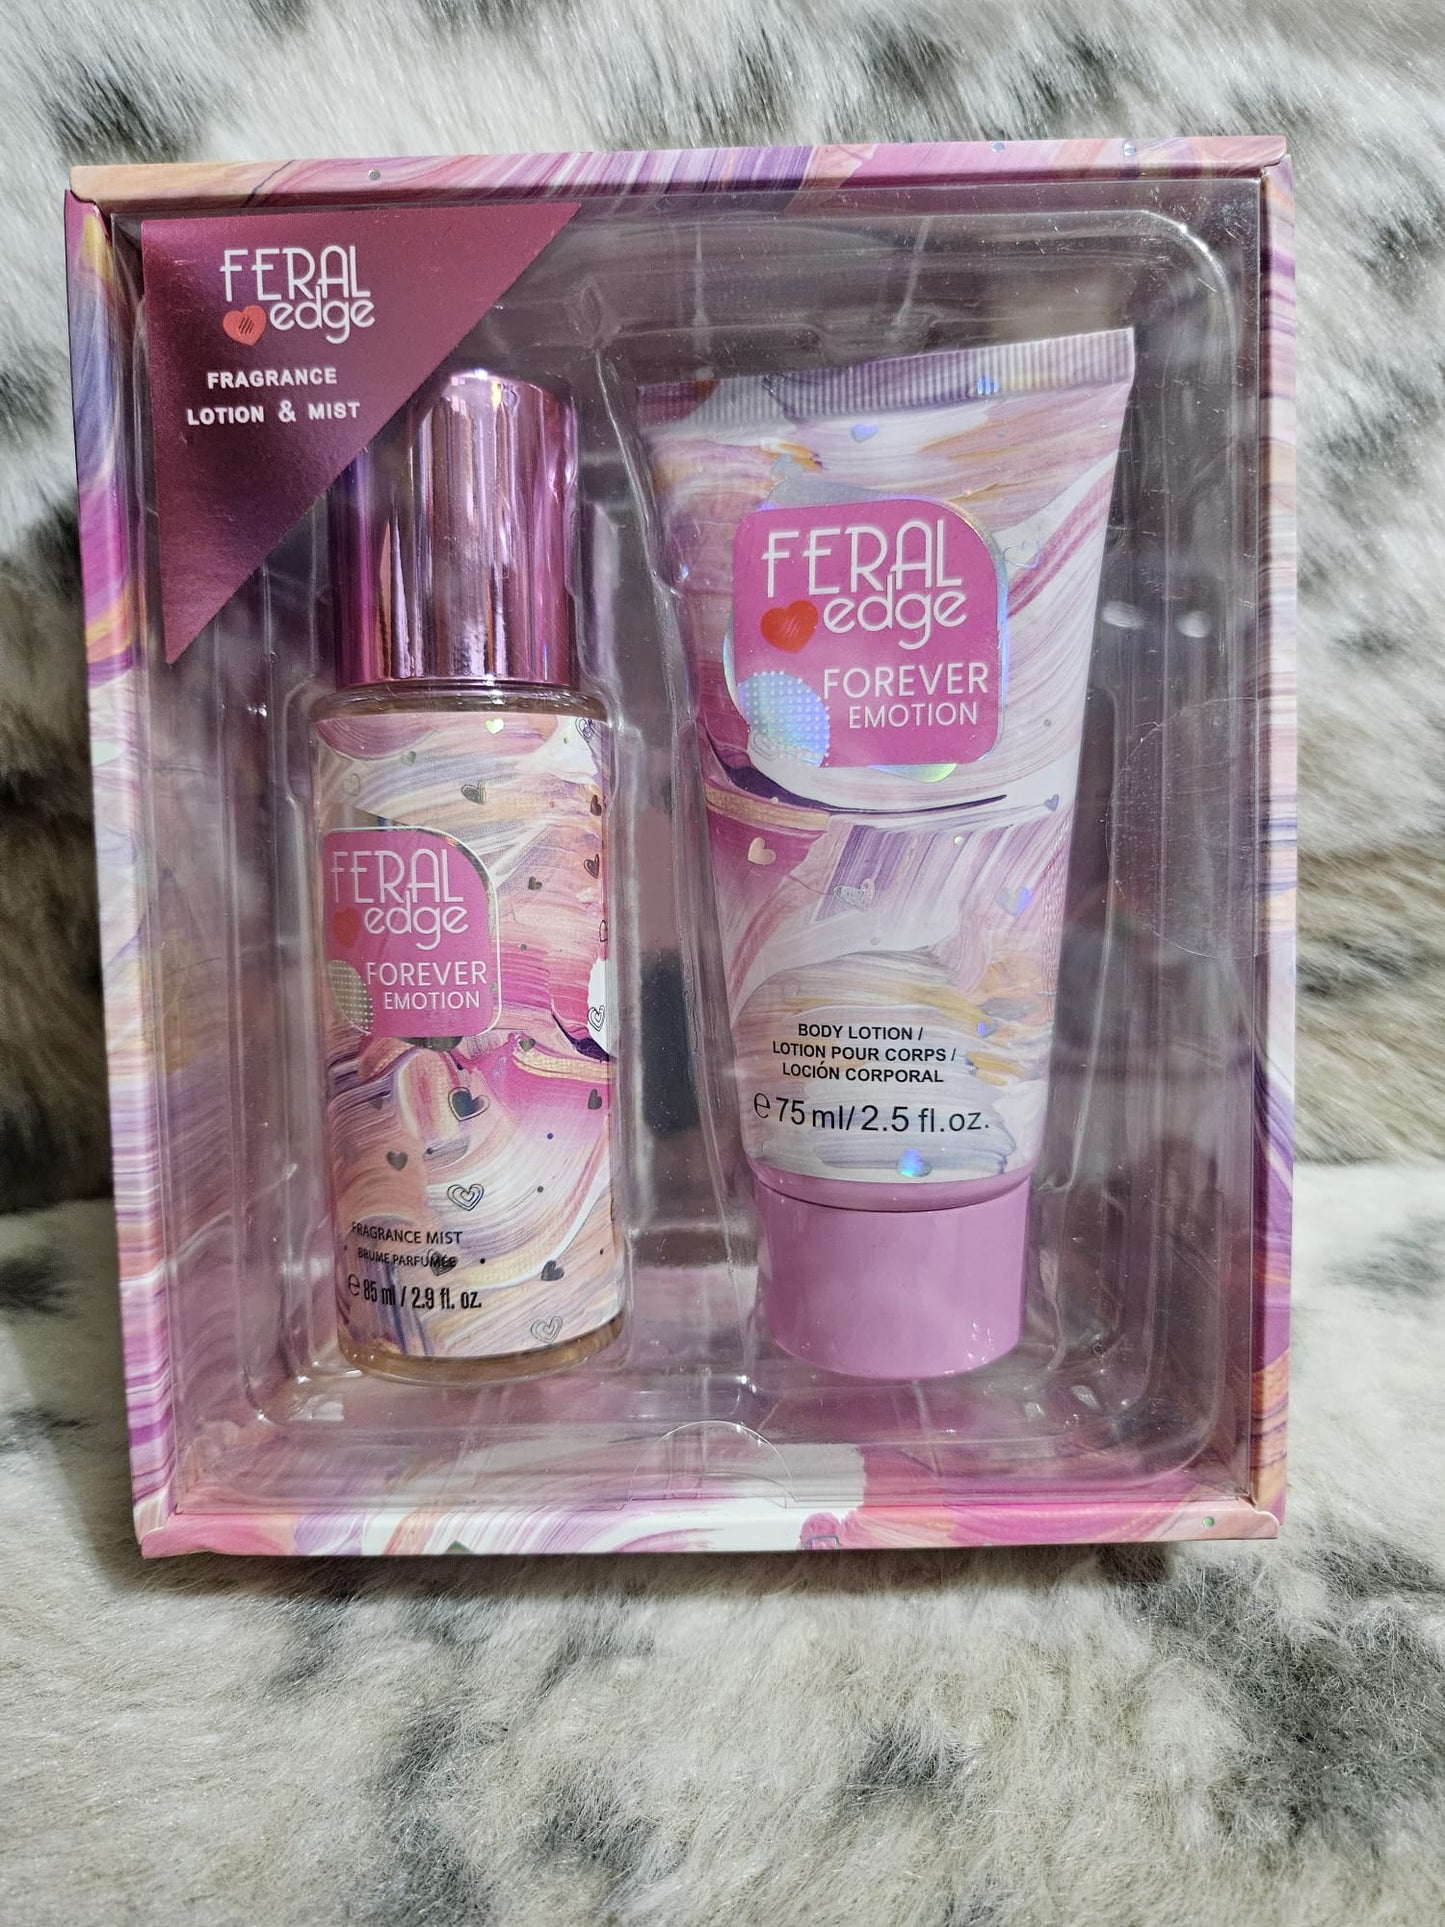 Feral Edge Fragrance lotion  and Mist set